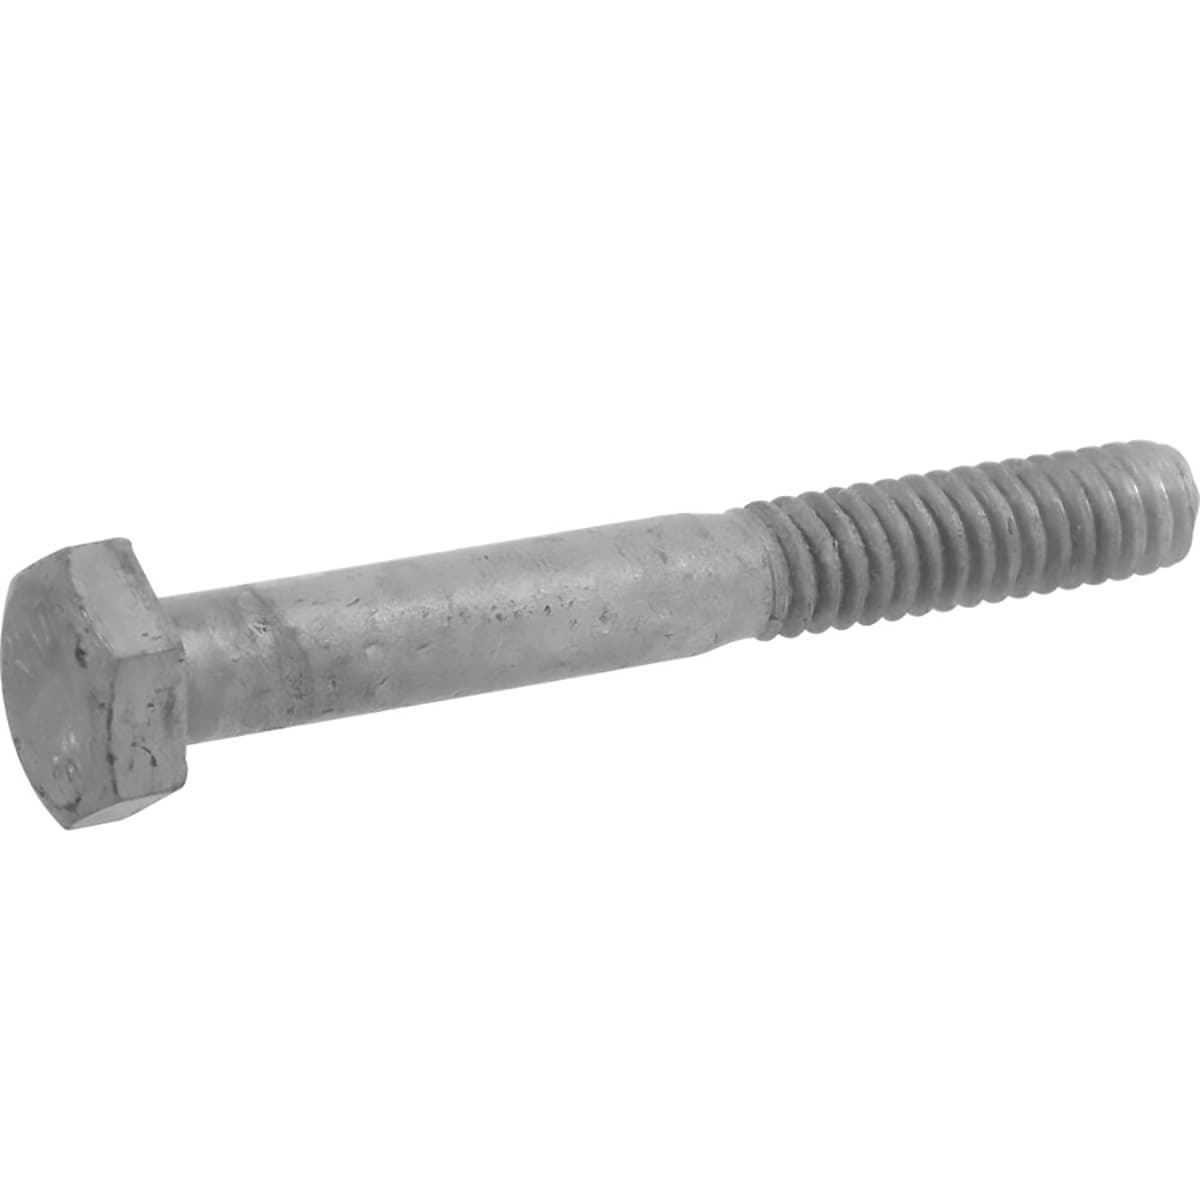 Hex Head Bolt 3/8" 24 NF x 1" Long "10 Bolts" Stainless Steel 3/8-24x1 